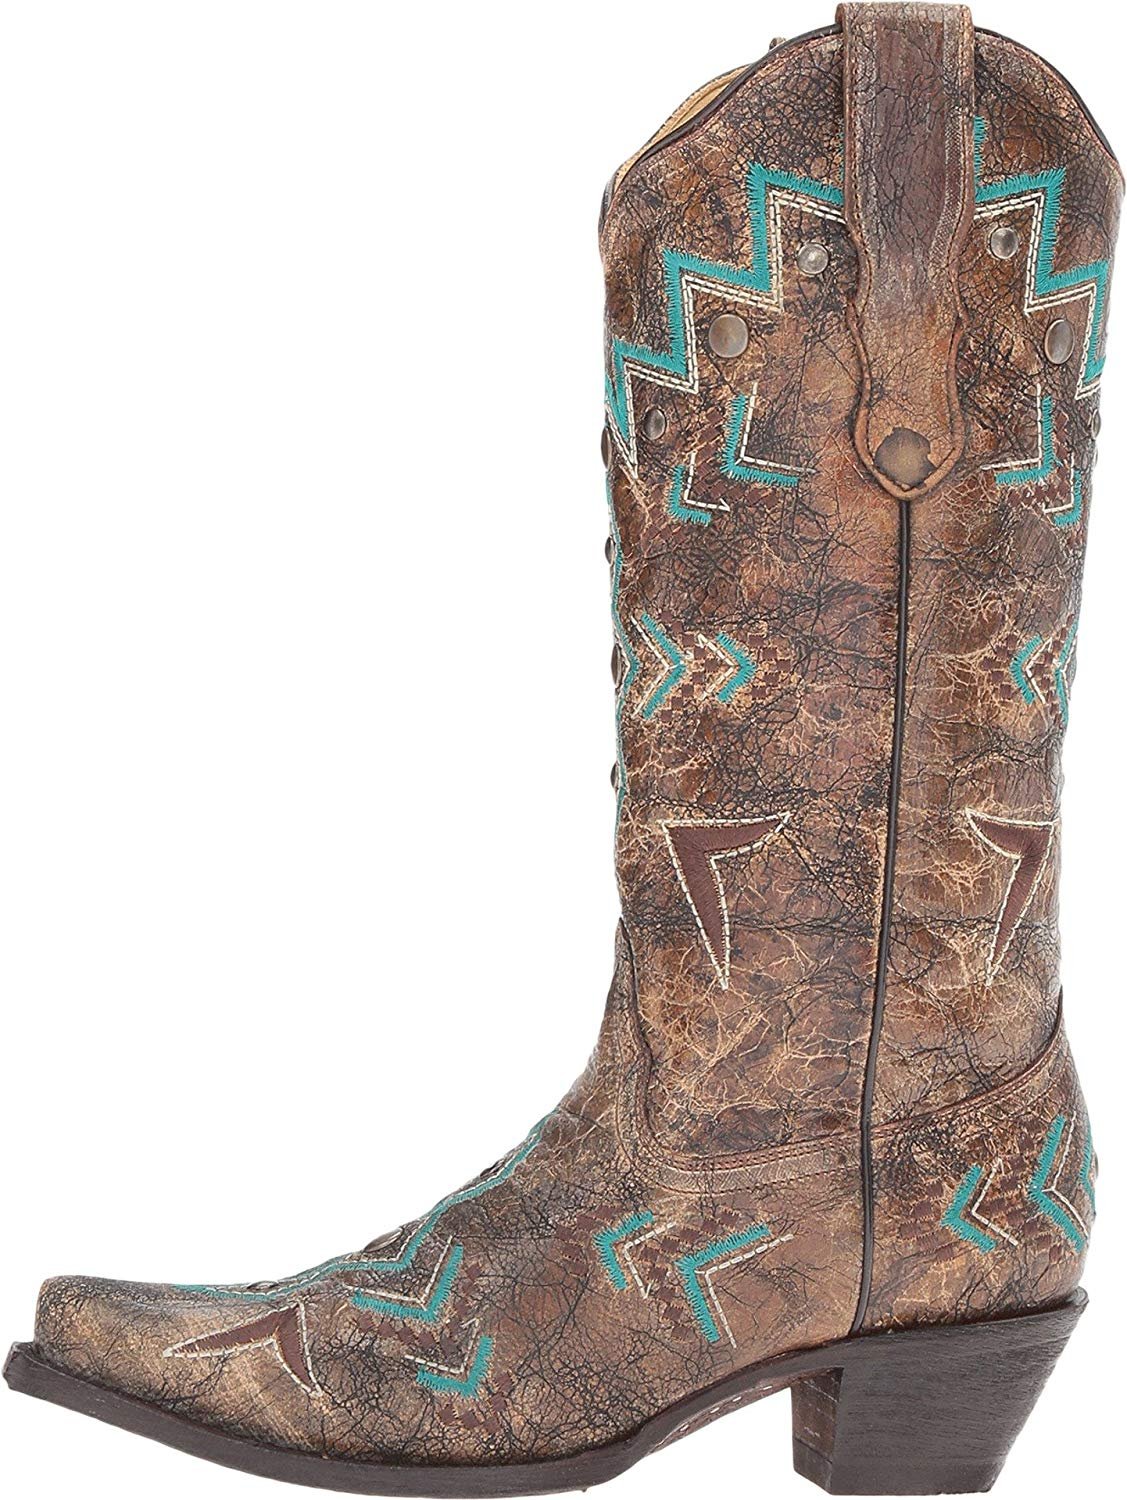 corral brand boots